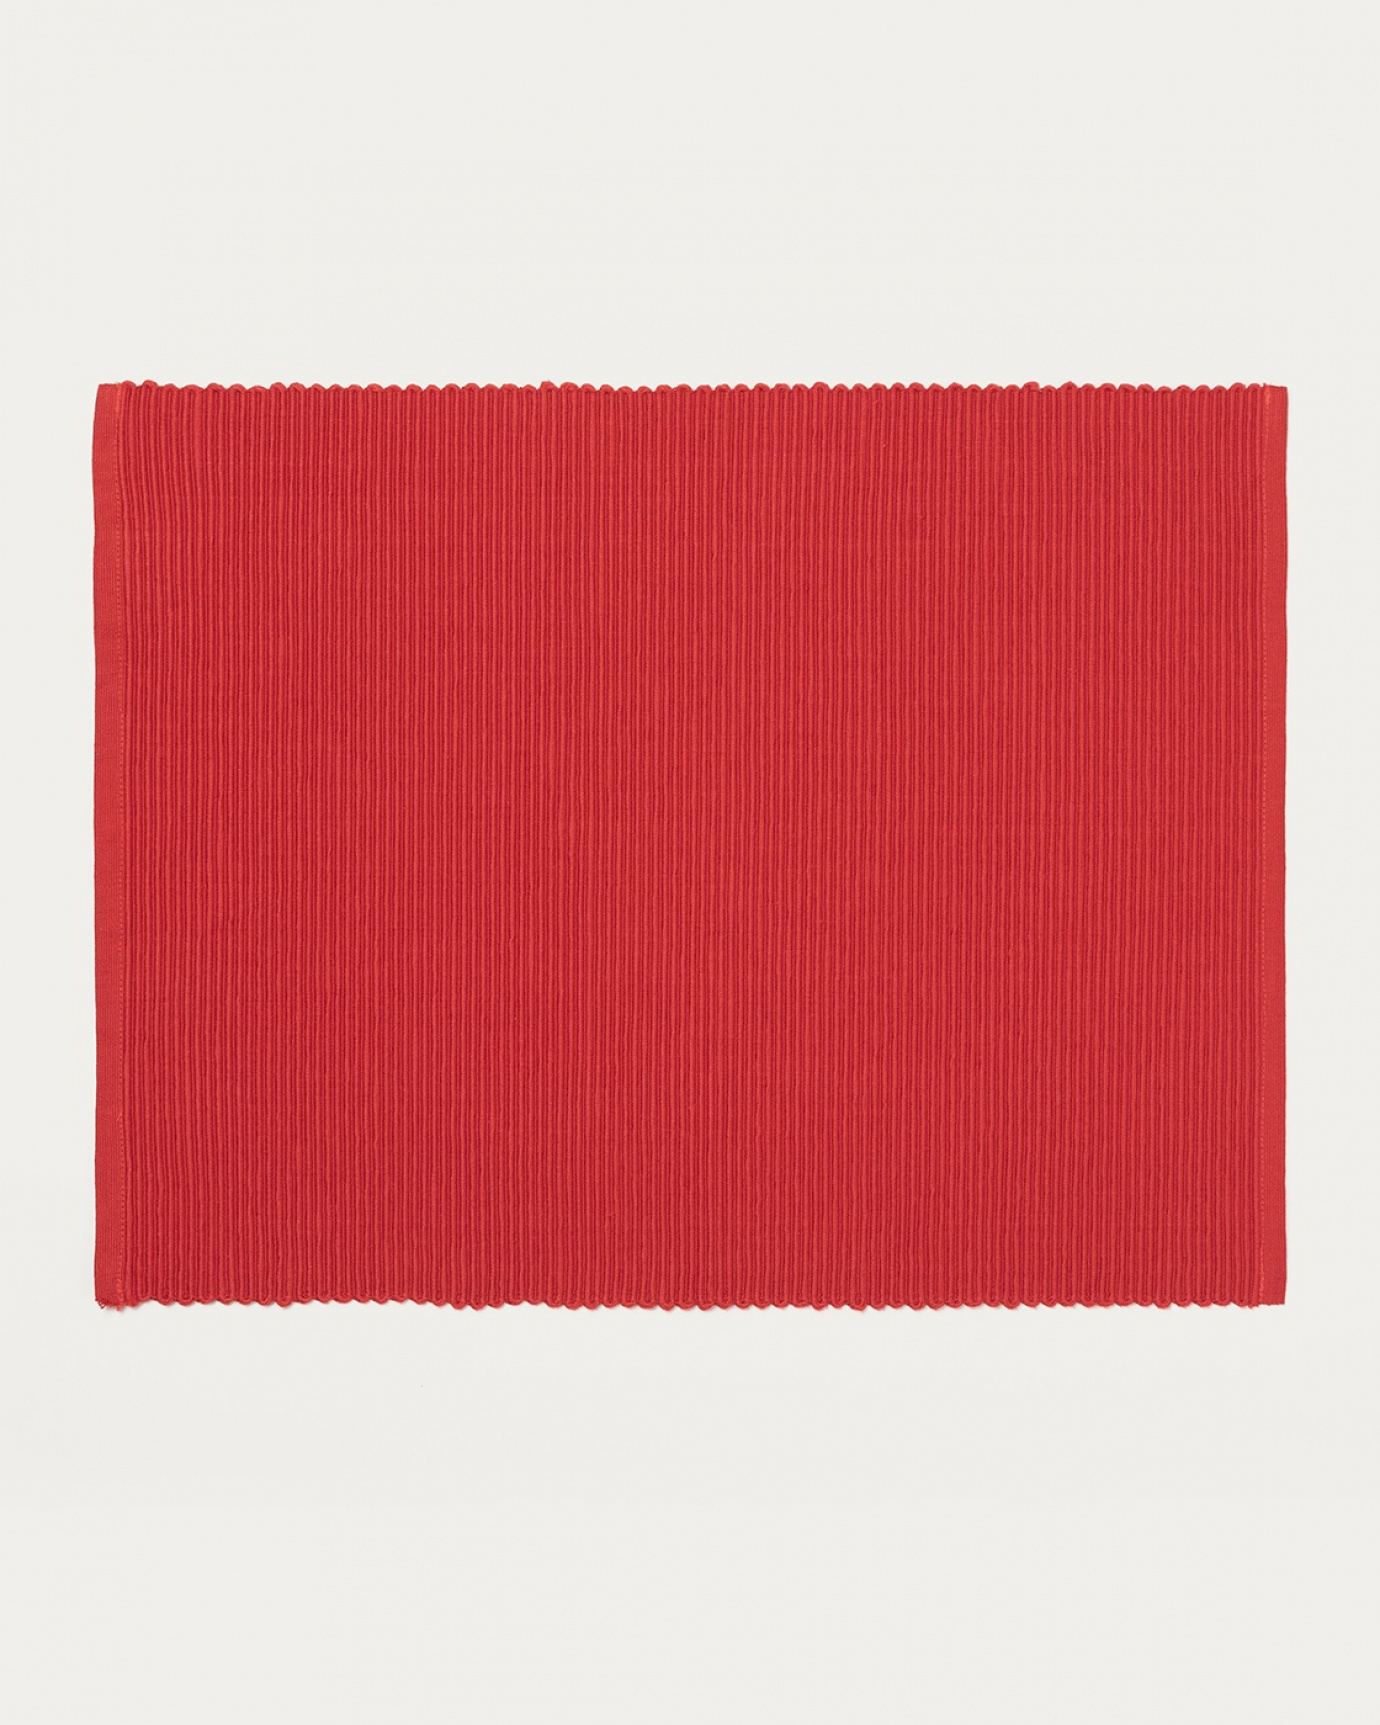 Product image china red UNI placemat made of soft cotton in ribbed quality from LINUM DESIGN. Size 35x46 cm and sold in 1-pack.